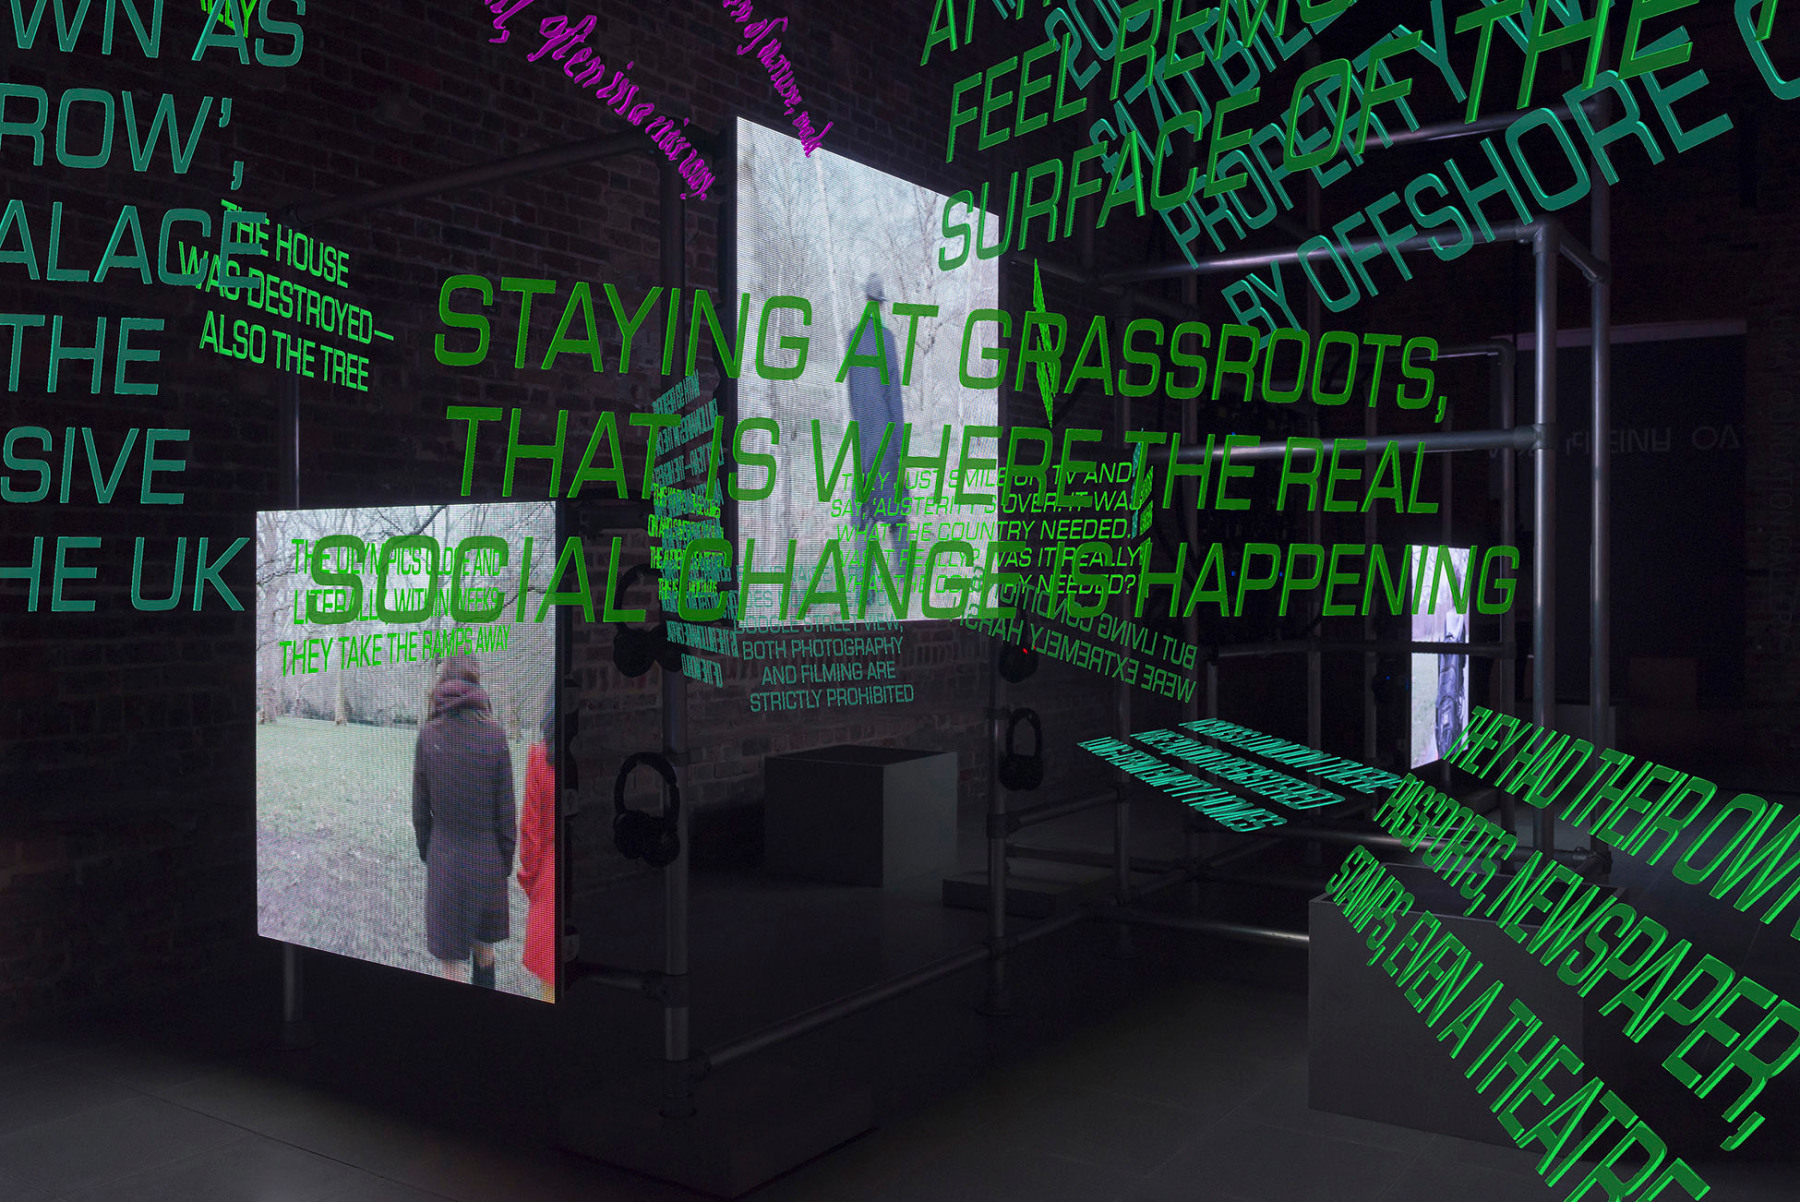 Hito Steyerl,&nbsp;Hito Steyerl: Power Plants, April 11 - May 6, 2019,&nbsp;Serpentine Galleries, London, England